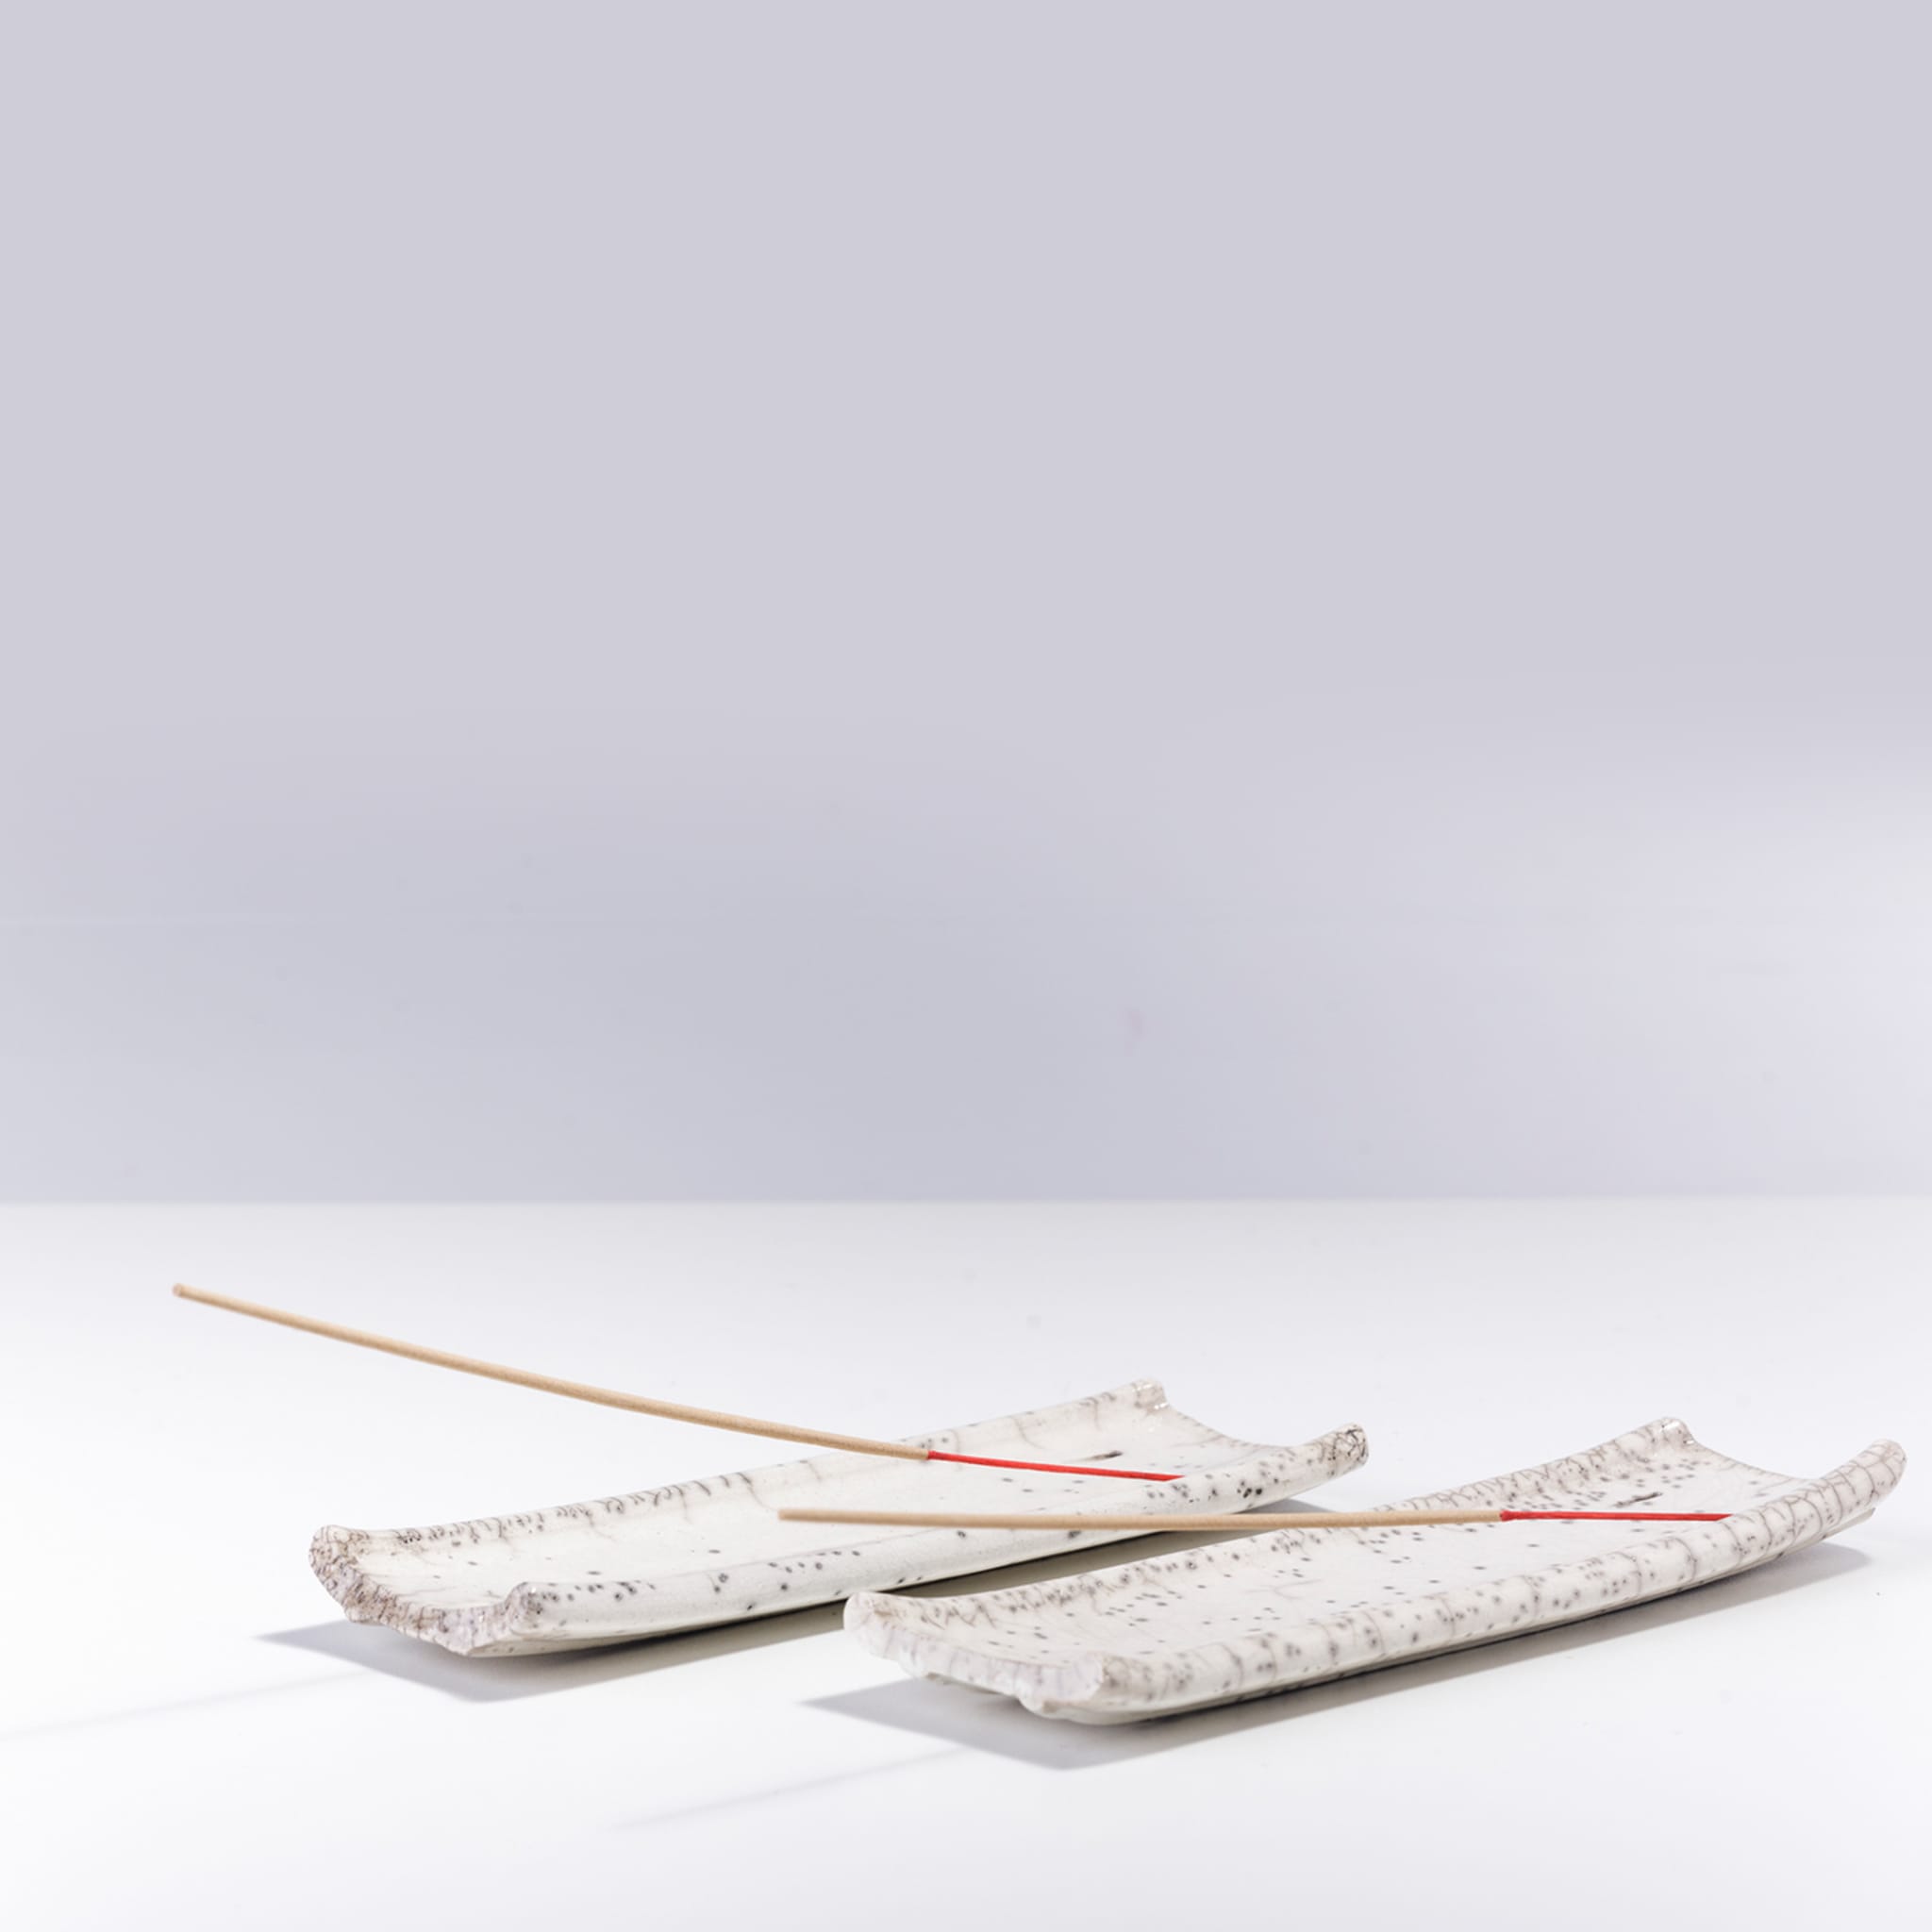 Incenso Set of 2 Incense Holders - Alternative view 5